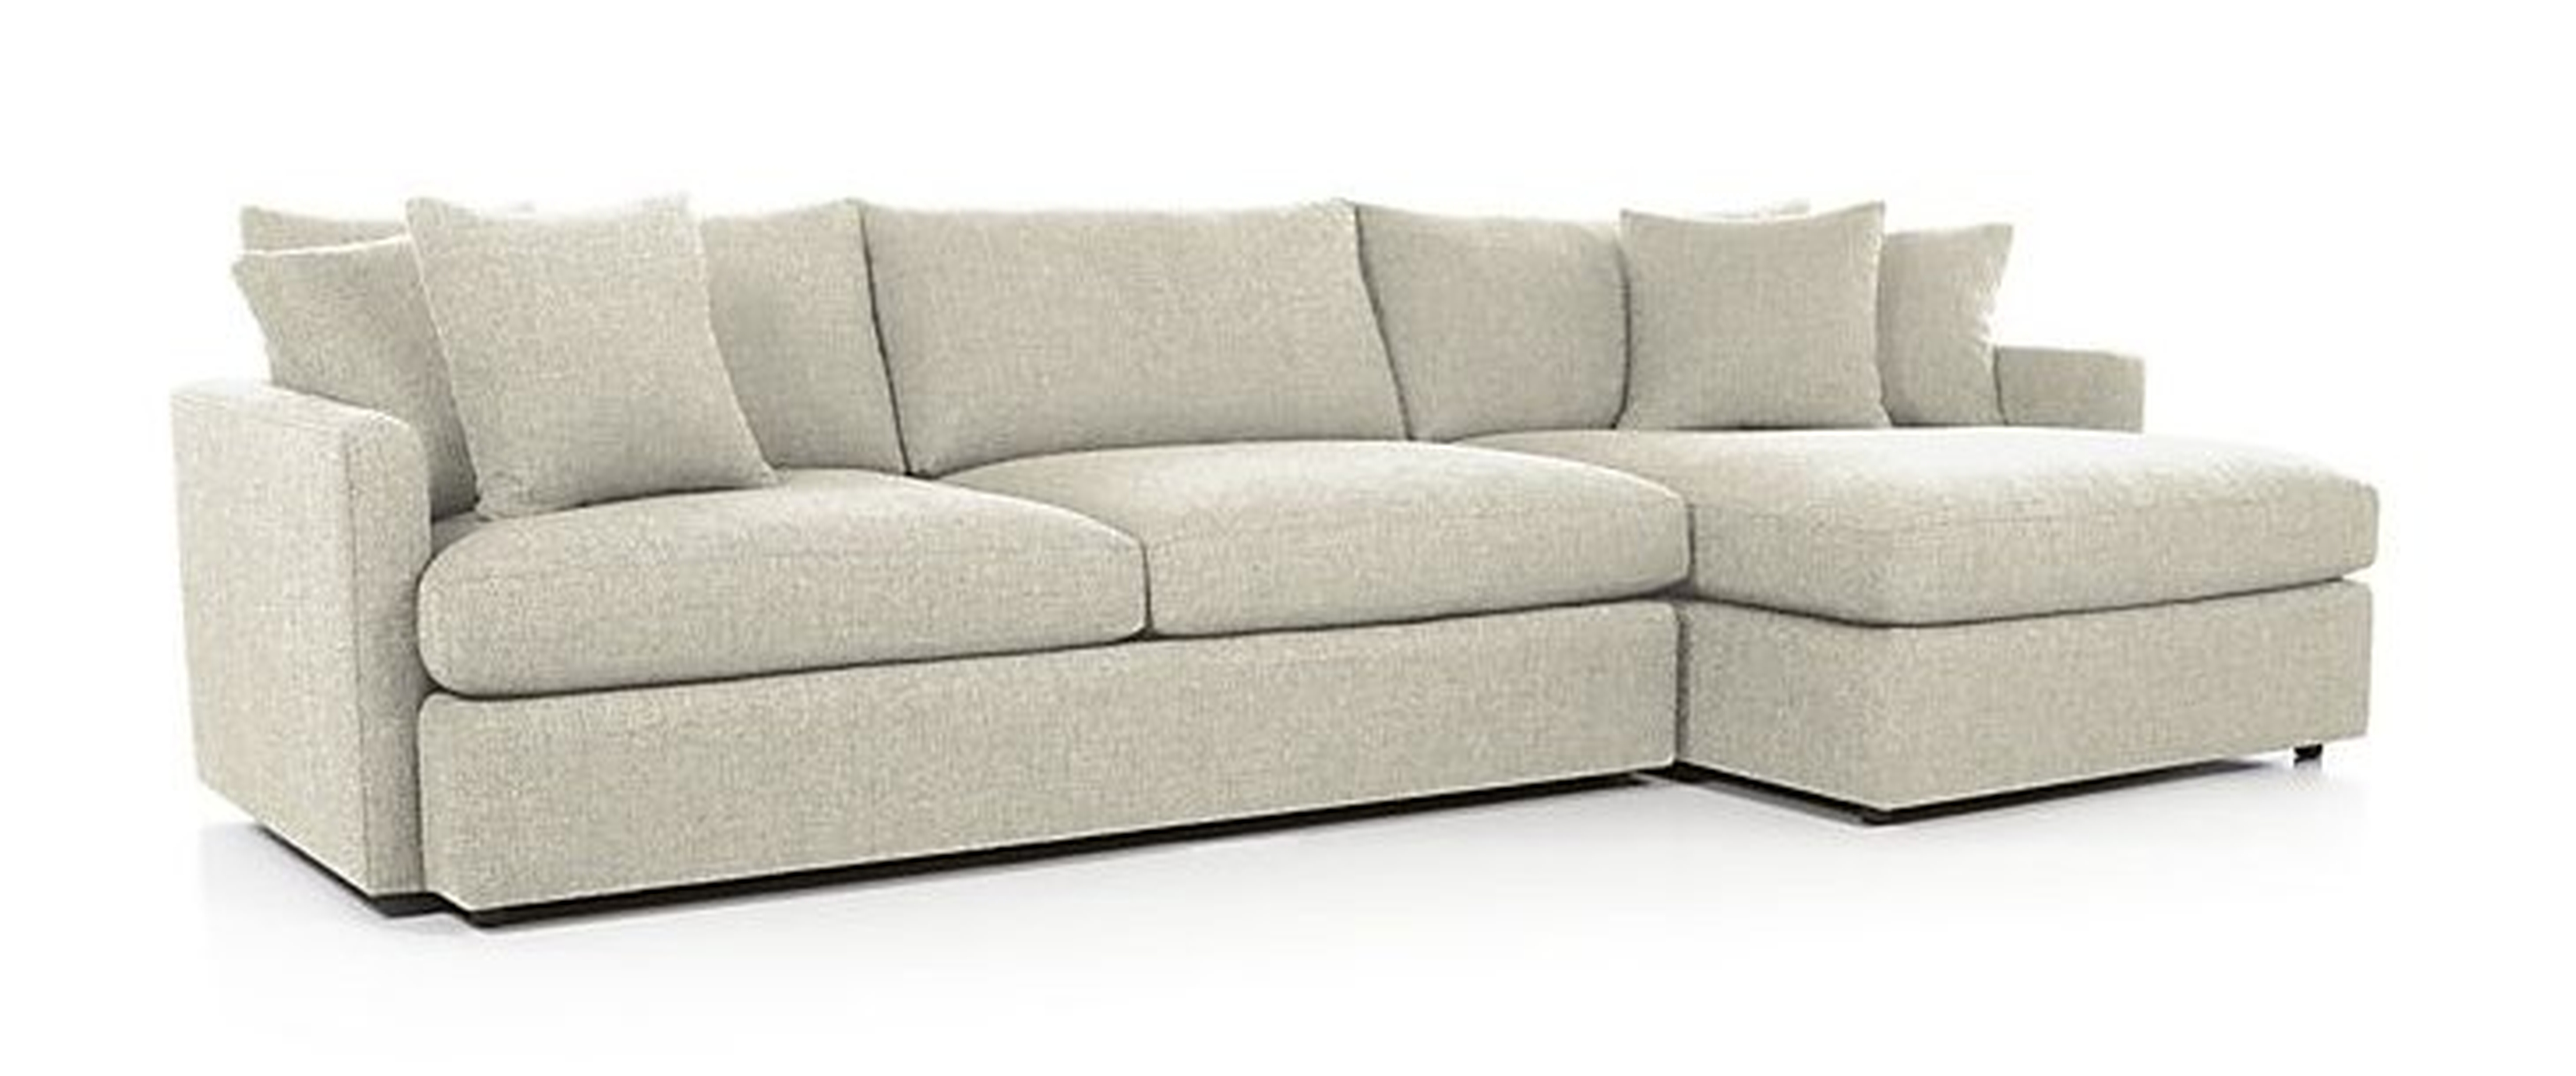 Lounge II 2-Piece Sectional Sofa - Taft Cement- Ships in Nov - Crate and Barrel